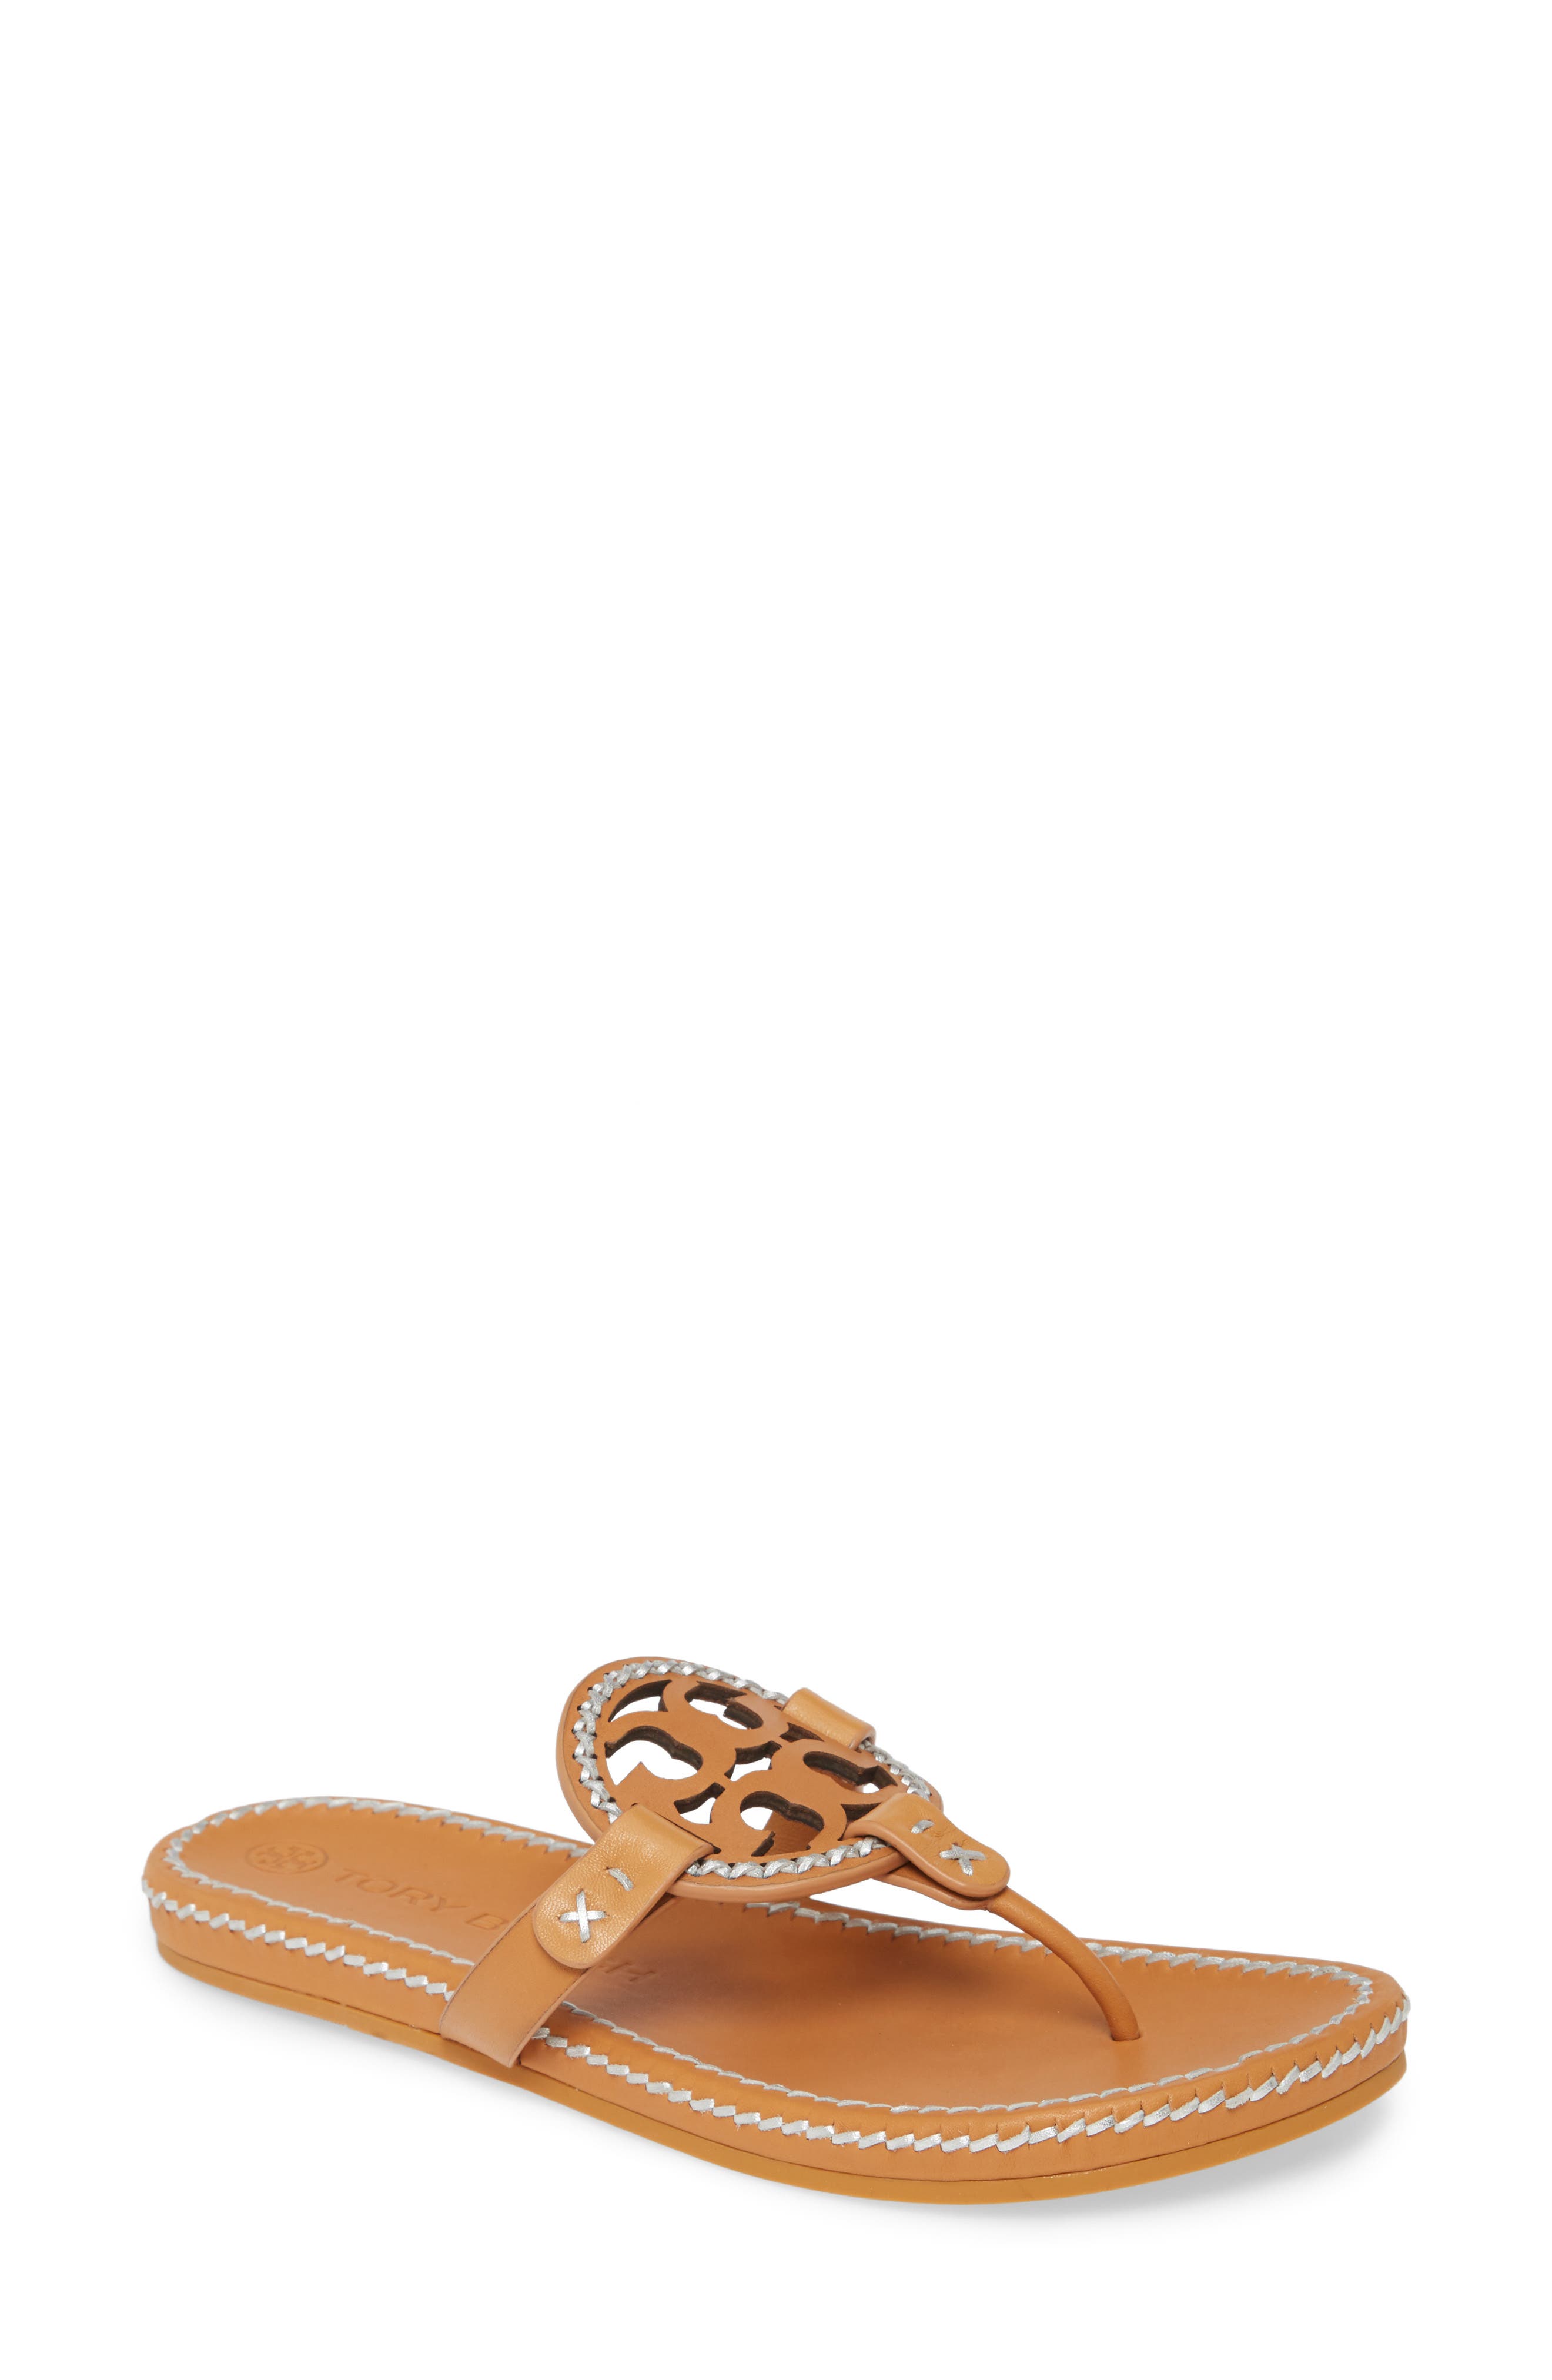 tory burch sandals afterpay